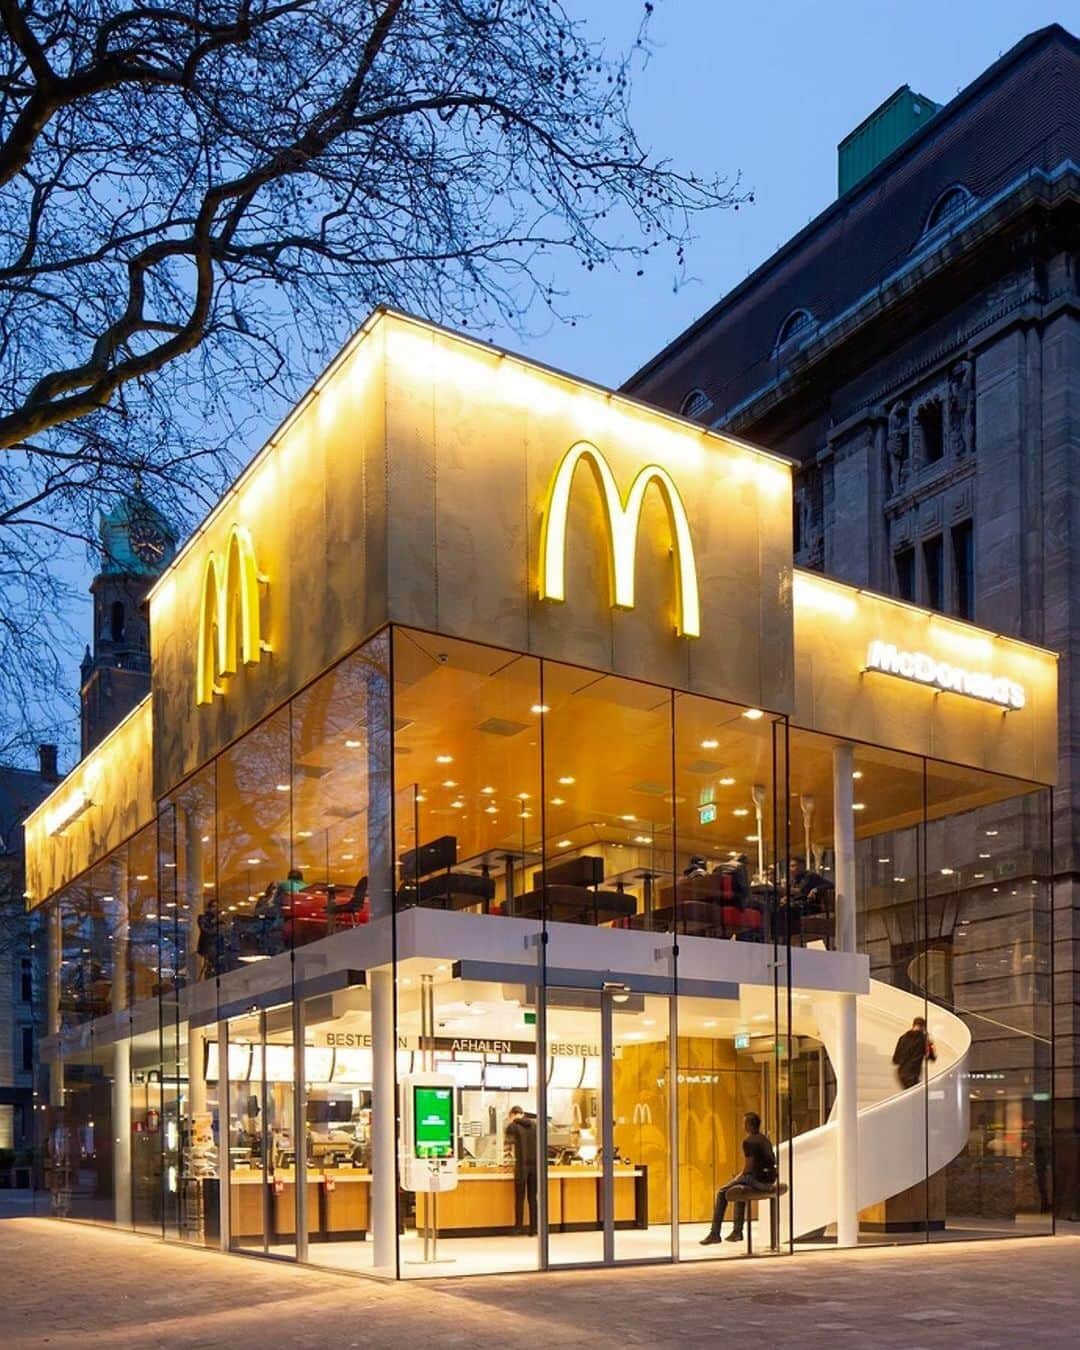 Architecture - Housesさんのインスタグラム写真 - (Architecture - HousesInstagram)「⁣ The most famous fast food company 🍔 in the world has a very distinctive style in its restaurants. But this one in Rotterdam breaks with the established and gives it a 𝗻𝗲𝘄, 𝗺𝘂𝗰𝗵 𝗺𝗼𝗿𝗲 𝗺𝗼𝗱𝗲𝗿𝗻 𝗱𝗲𝘀𝗶𝗴𝗻 𝗮𝗻𝗱 𝗮𝗿𝗰𝗵𝗶𝘁𝗲𝗰𝘁𝘂𝗿𝗲.⁣ ⁣ What do you think about it? Double tap if you like it.💙⁣⁣ _____⁣⁣⁣⁣⁣⁣⁣⁣⁣⁣⁣⁣⁣⁣⁣⁣⁣⁣⁣⁣⁣⁣⁣⁣⁣⁣⁣⁣⁣⁣⁣⁣⁣⁣⁣⁣ 📐 @mei_architects  📸  @ossipvanduivenbode  📍 Rotterdam⁣ #archidesignhome⁣⁣ _____⁣⁣⁣⁣⁣⁣⁣⁣⁣⁣⁣⁣⁣⁣⁣⁣⁣⁣⁣⁣⁣⁣⁣⁣⁣⁣⁣⁣⁣⁣⁣⁣⁣⁣⁣⁣ #architecture #architects #archilovers #archigram #intaarchi #mcdonals #archidesign #arquitectura #architettura #interiordesign #archilovers #architecturephotography #amazingarchitecture #mcdonalslovers #archilove #newmcdonals」1月24日 0時00分 - _archidesignhome_